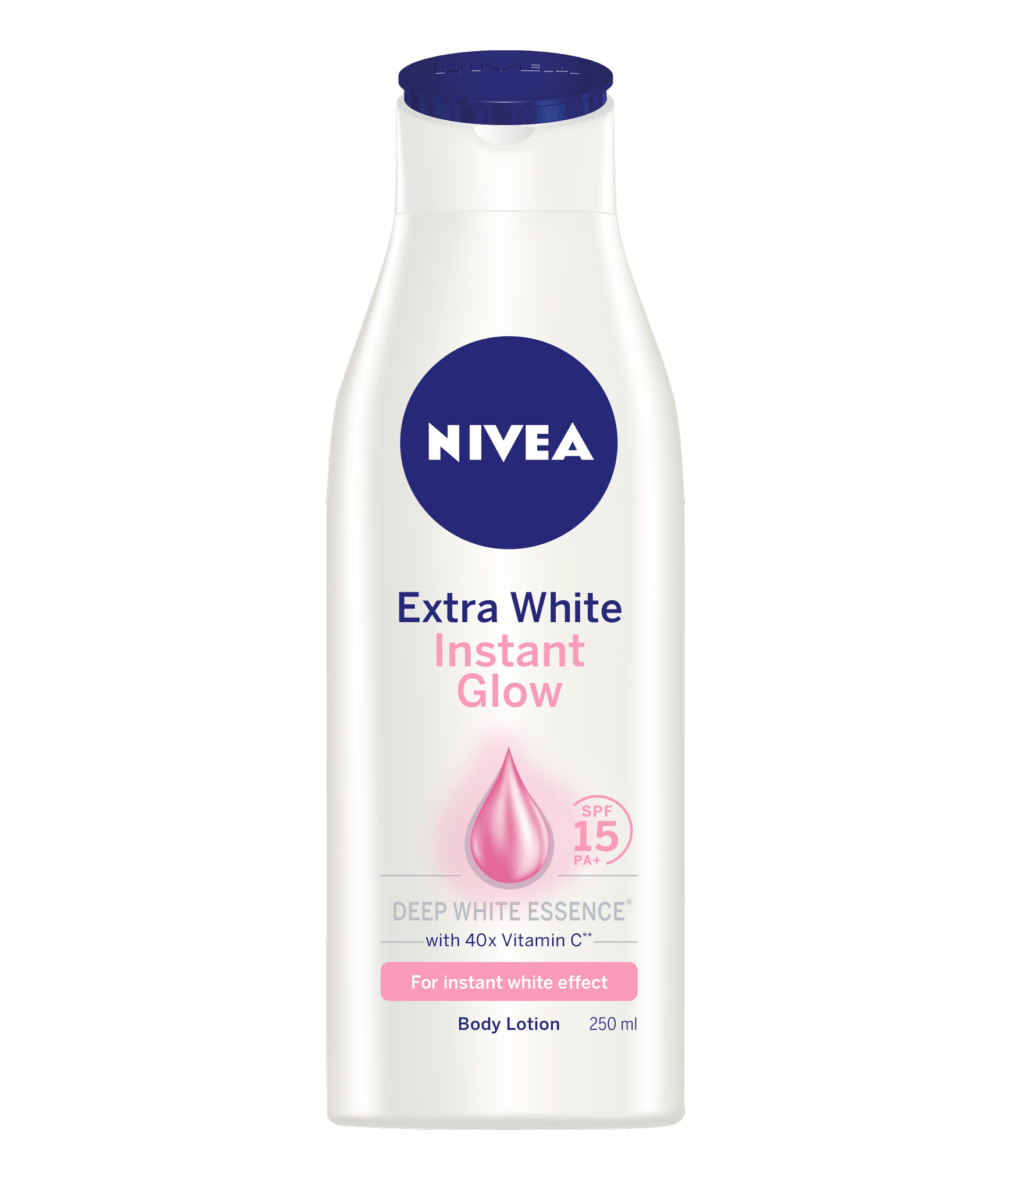 The Best Skin Whitening Body Lotion: 10 Products That Really Work 3